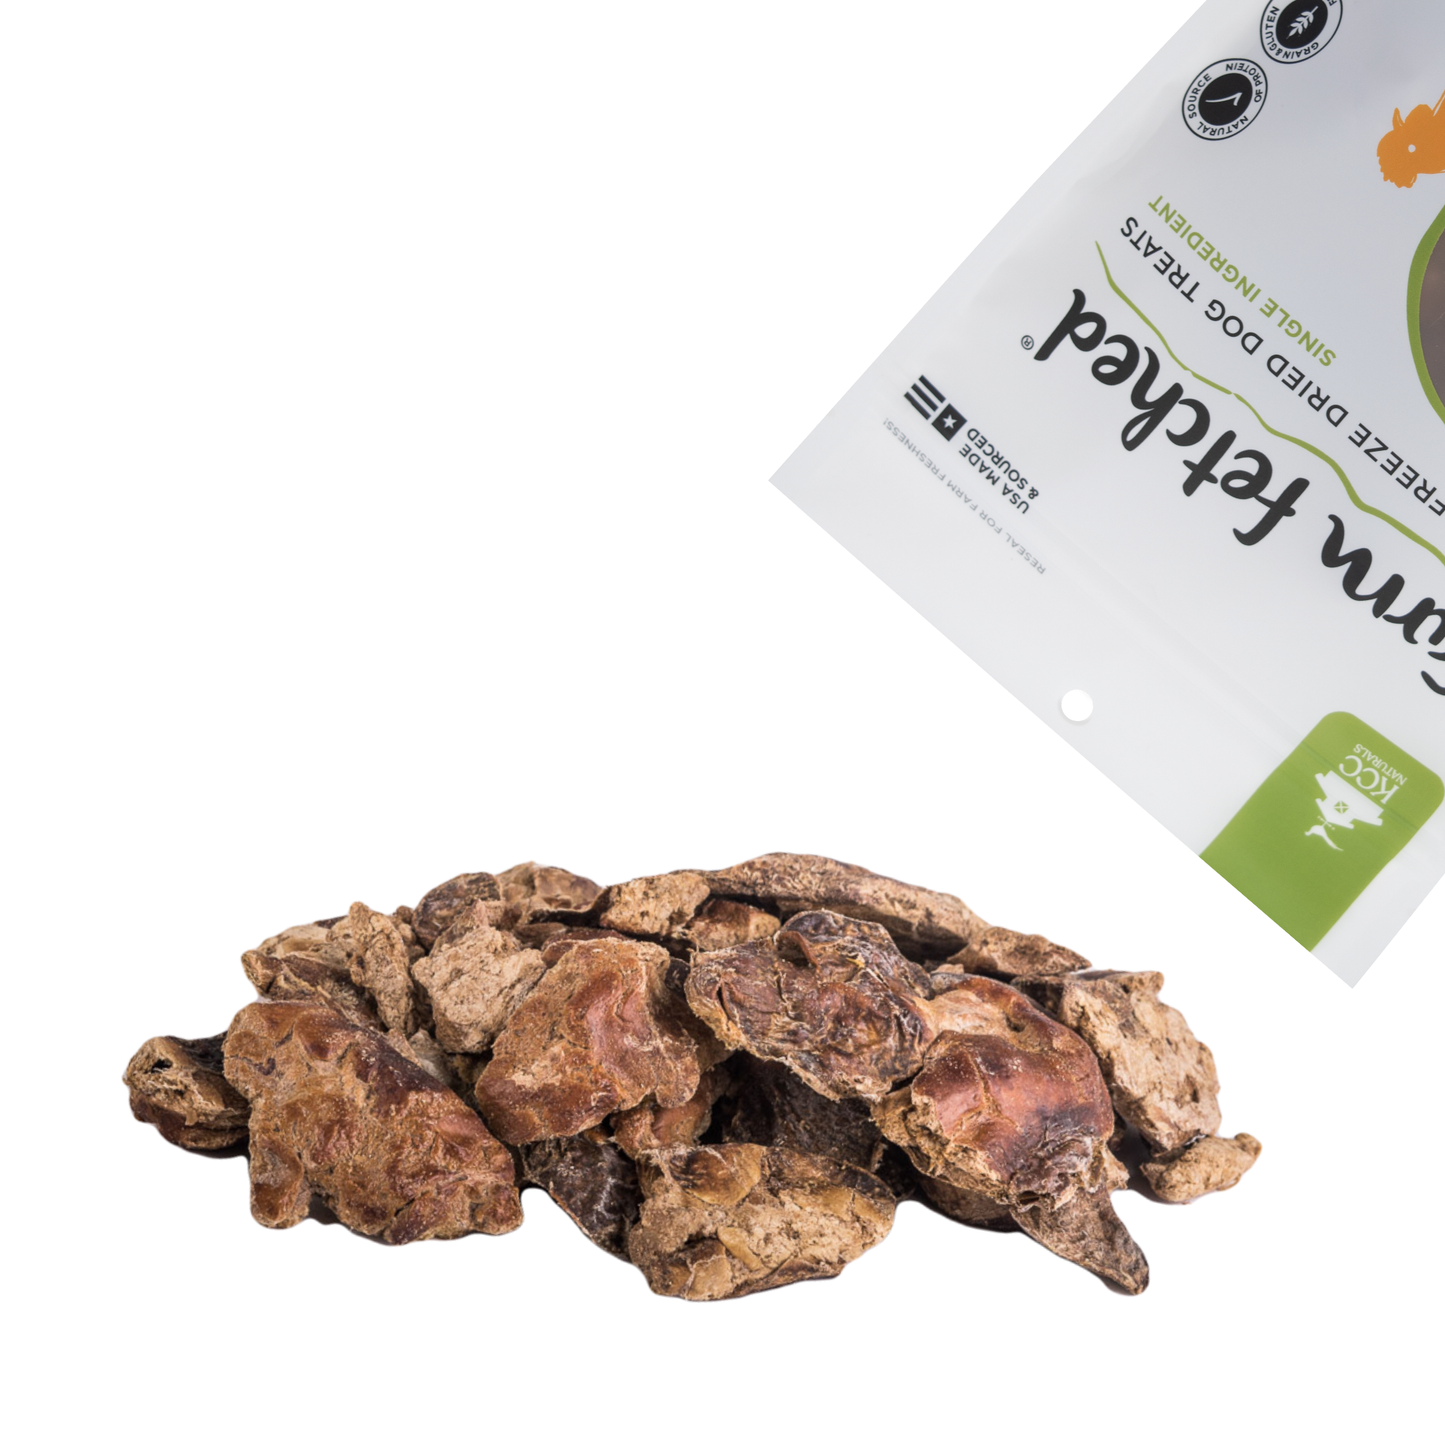 Chicken Liver dog product pouring out of package